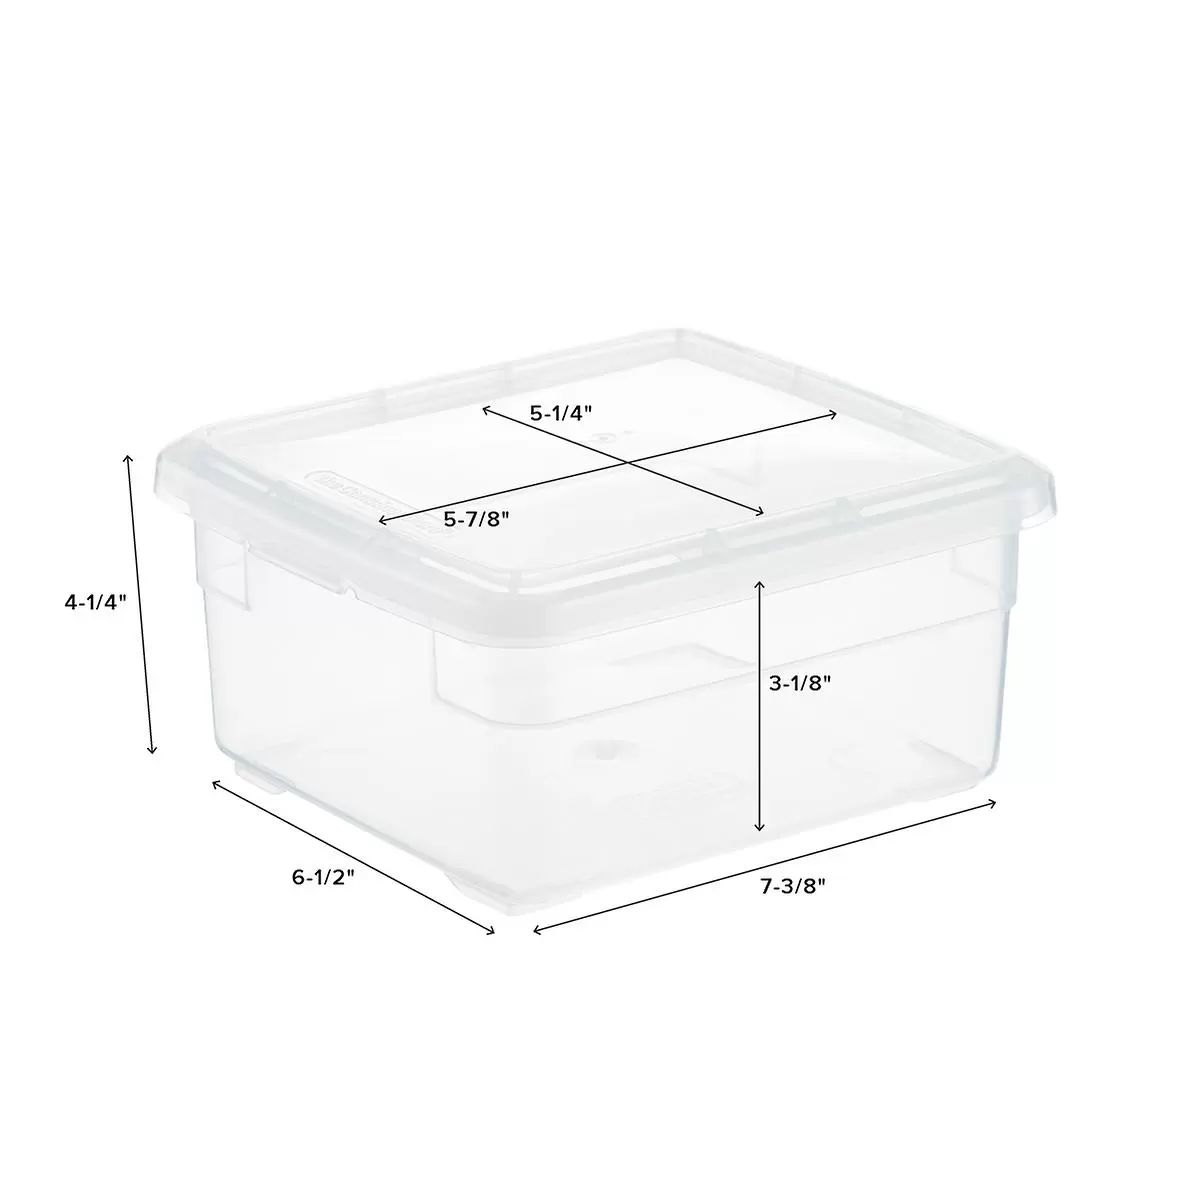 Our Large Shoe Box | The Container Store